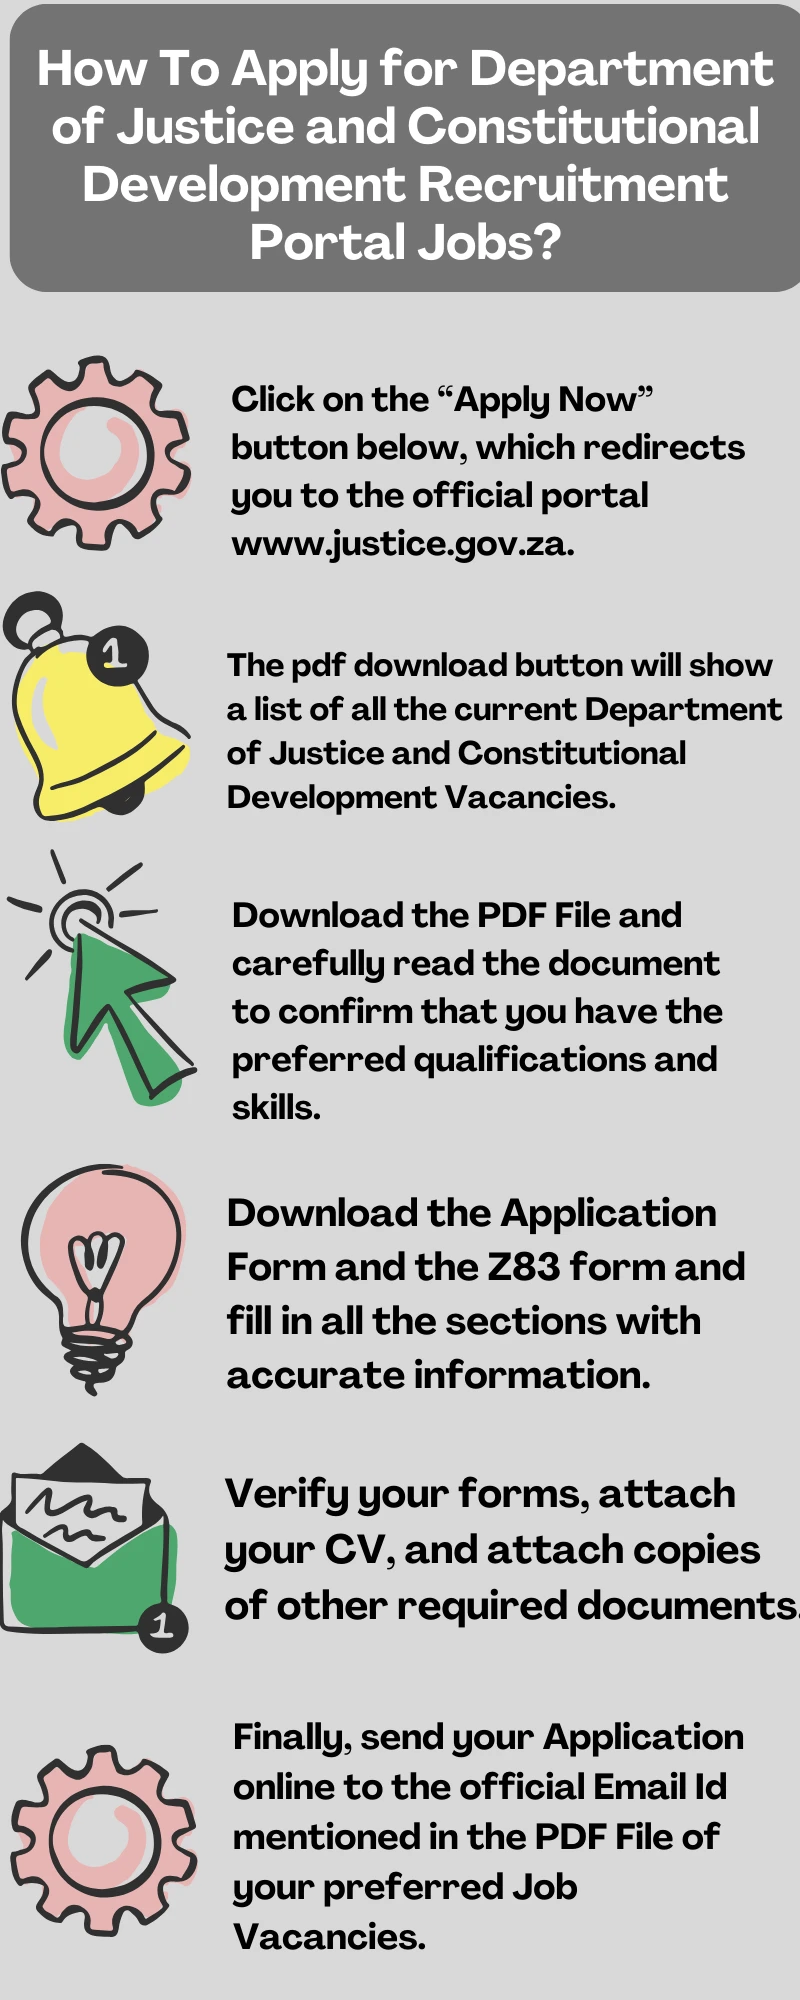 How To Apply for Department of Justice and Constitutional Development Recruitment Portal Jobs?